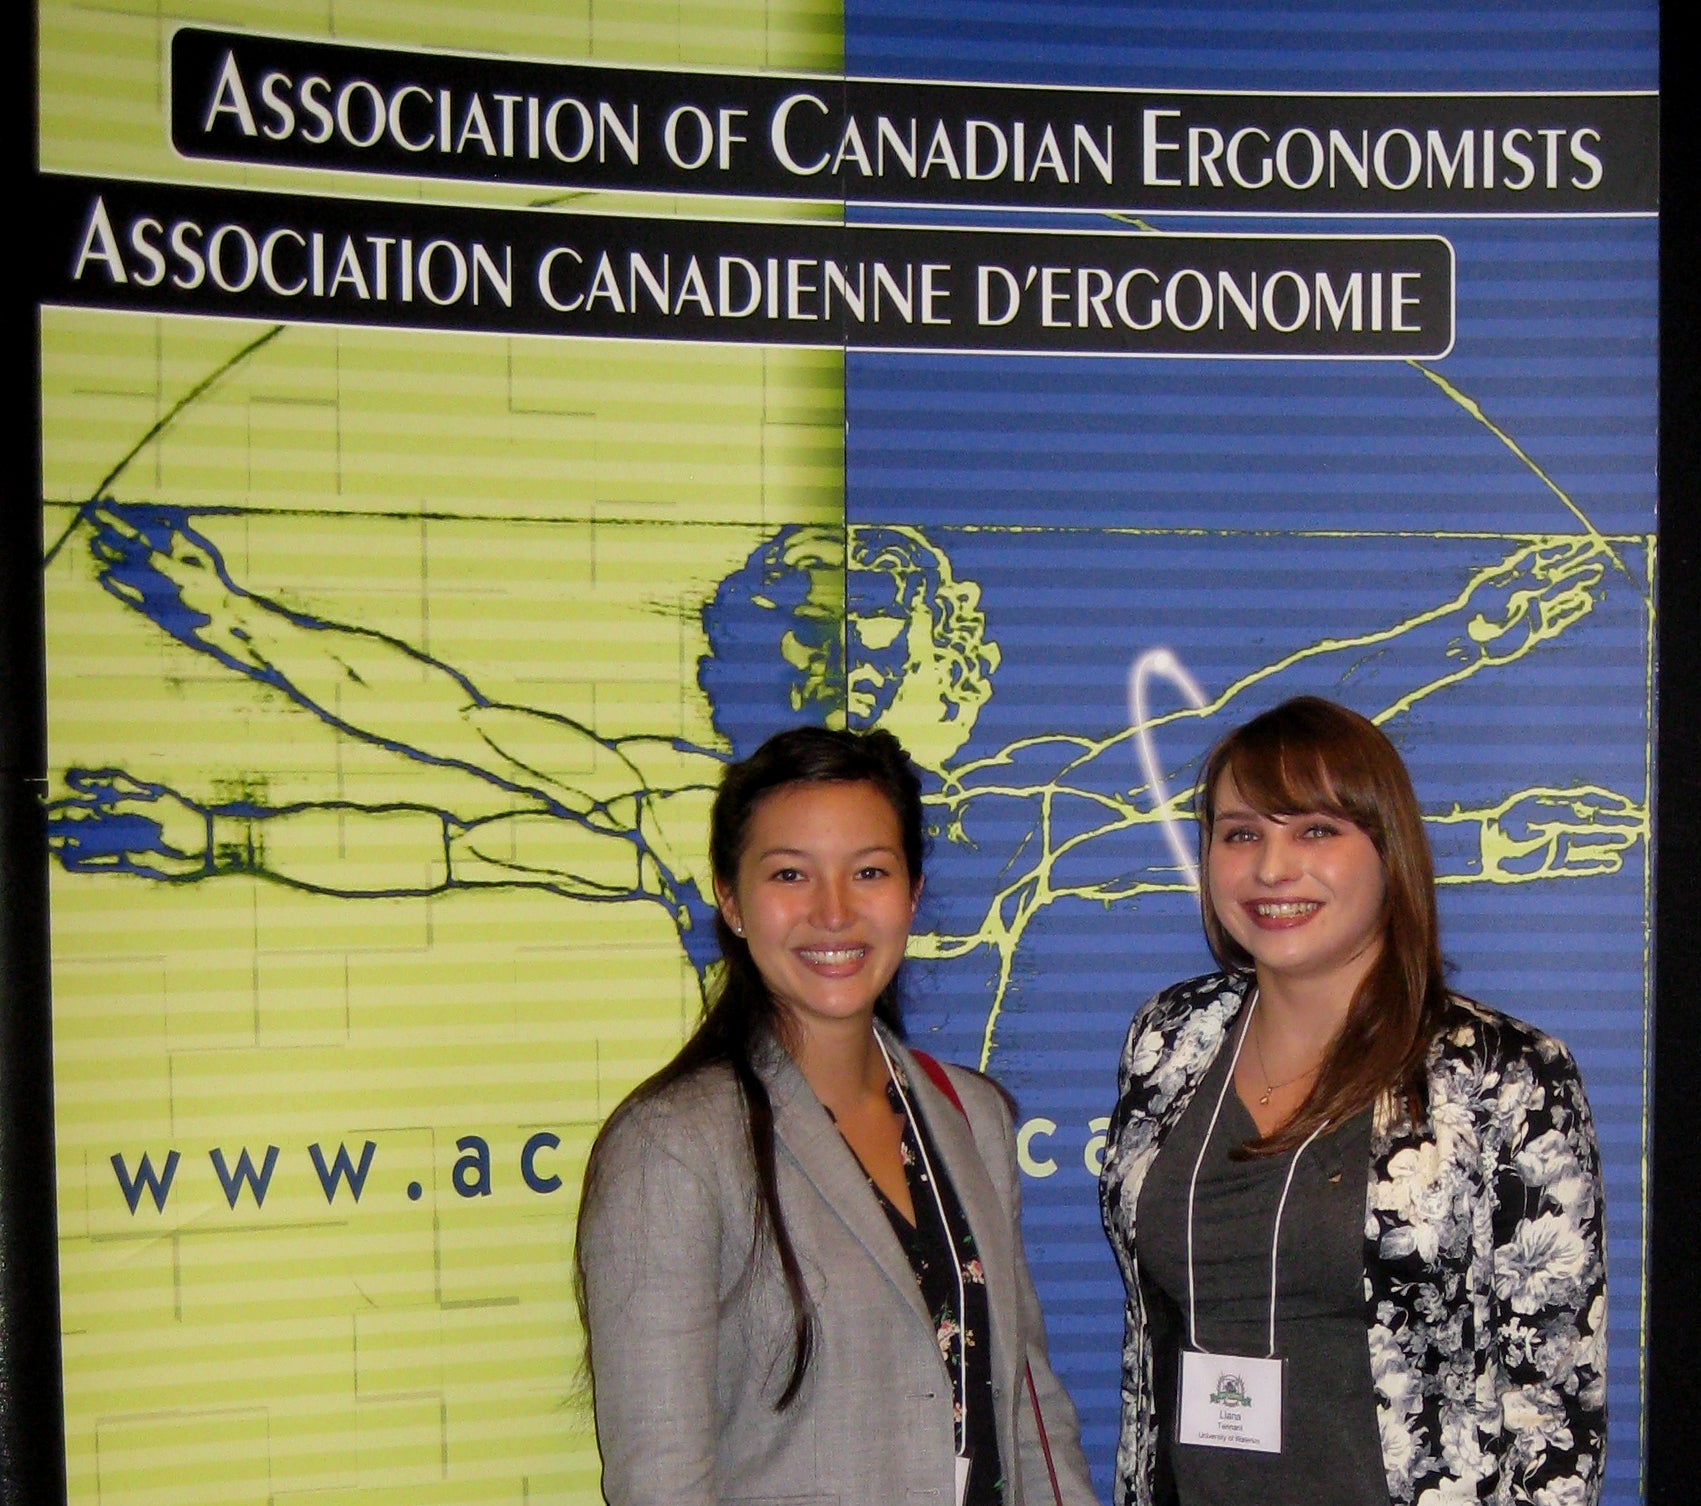 Helen and Liana infront of the conference banner